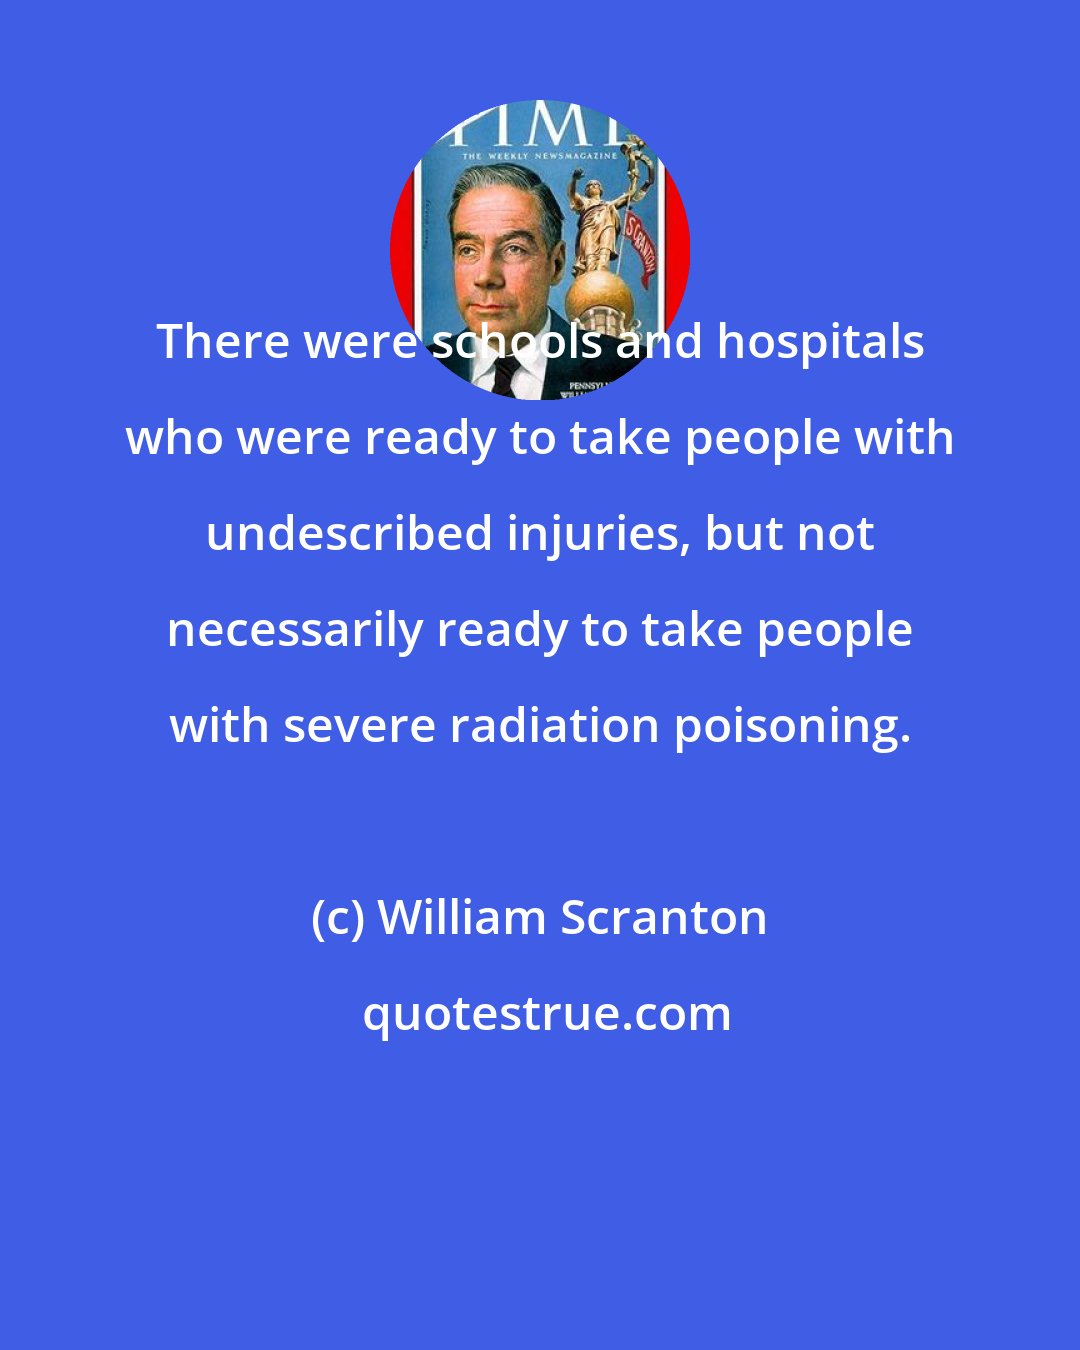 William Scranton: There were schools and hospitals who were ready to take people with undescribed injuries, but not necessarily ready to take people with severe radiation poisoning.